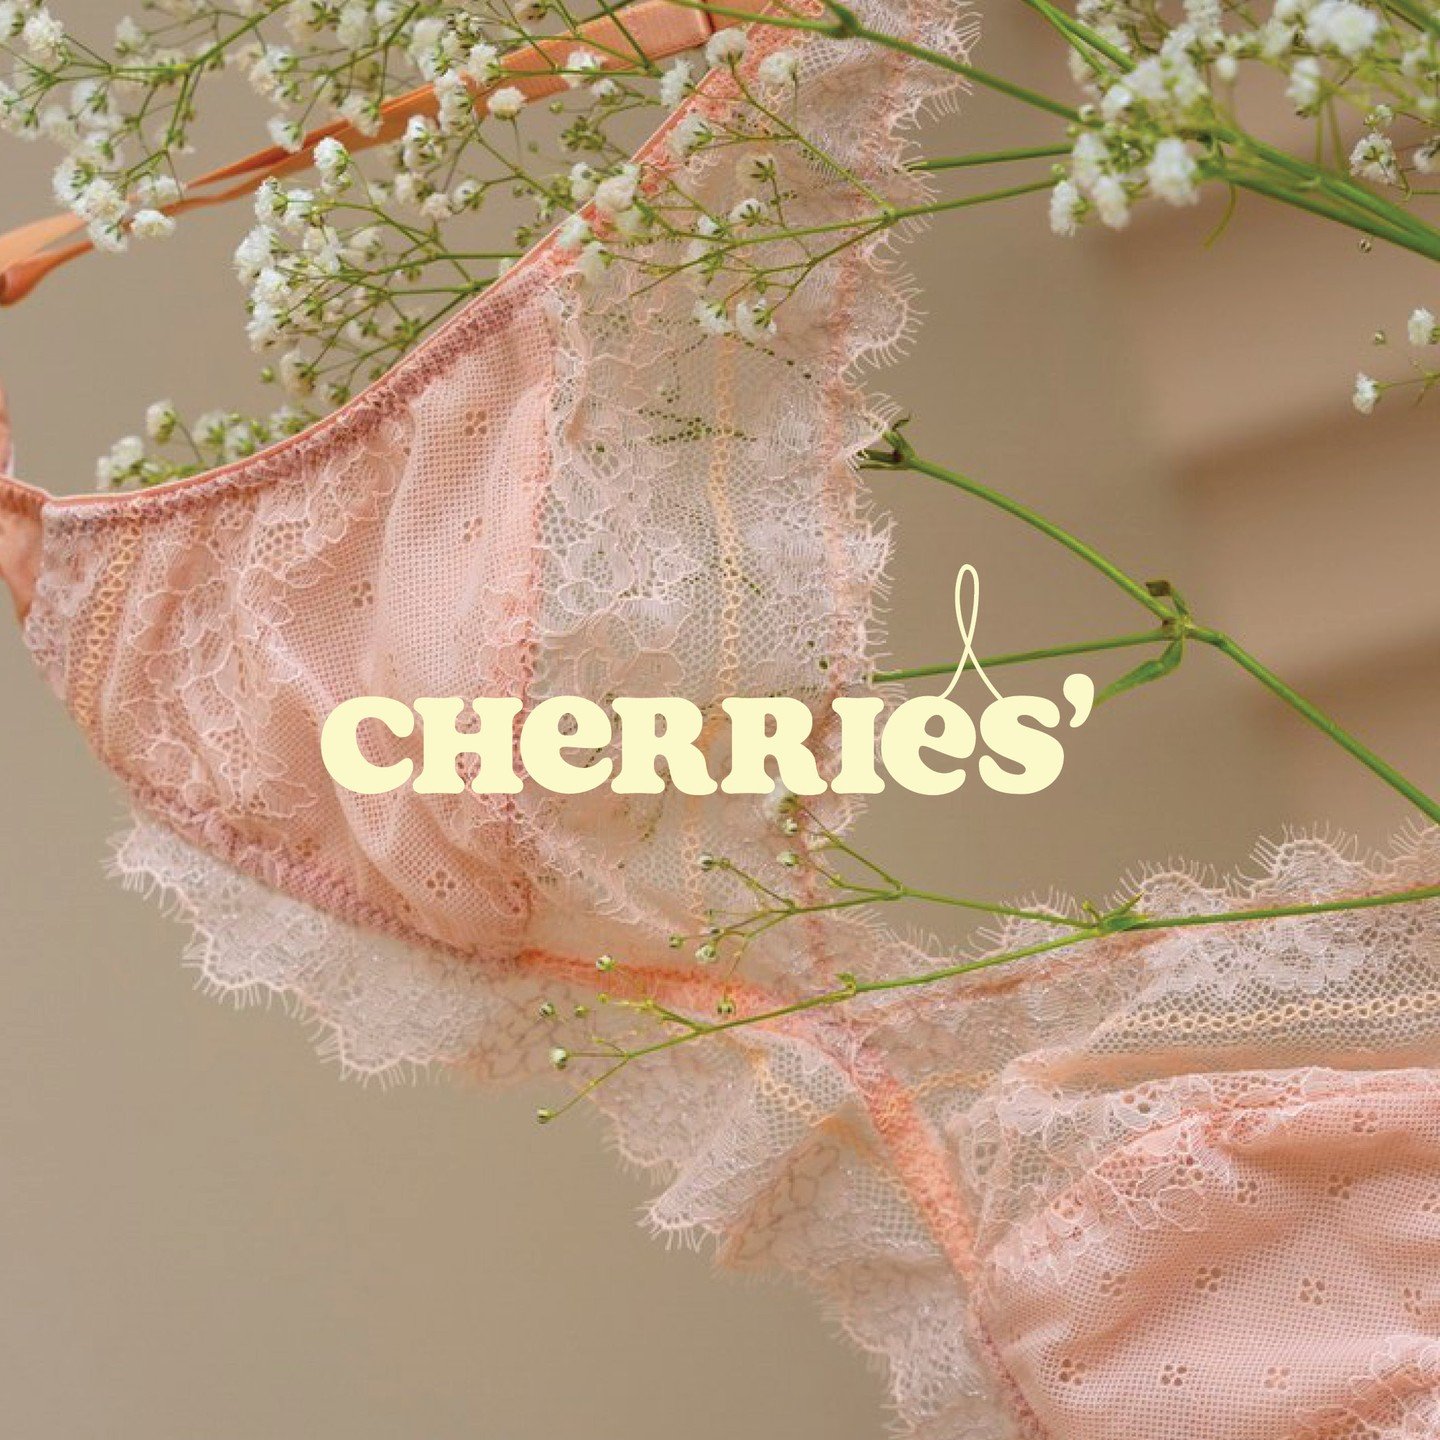 🍒 My entry for @theglowandgrowclub brief Cherries':

Cherries&rsquo; is a lingerie brand that believes life&rsquo;s too short for basic underwear. Their romantic pieces are crafted to make you feel empowered, confident, and ready to take on the worl